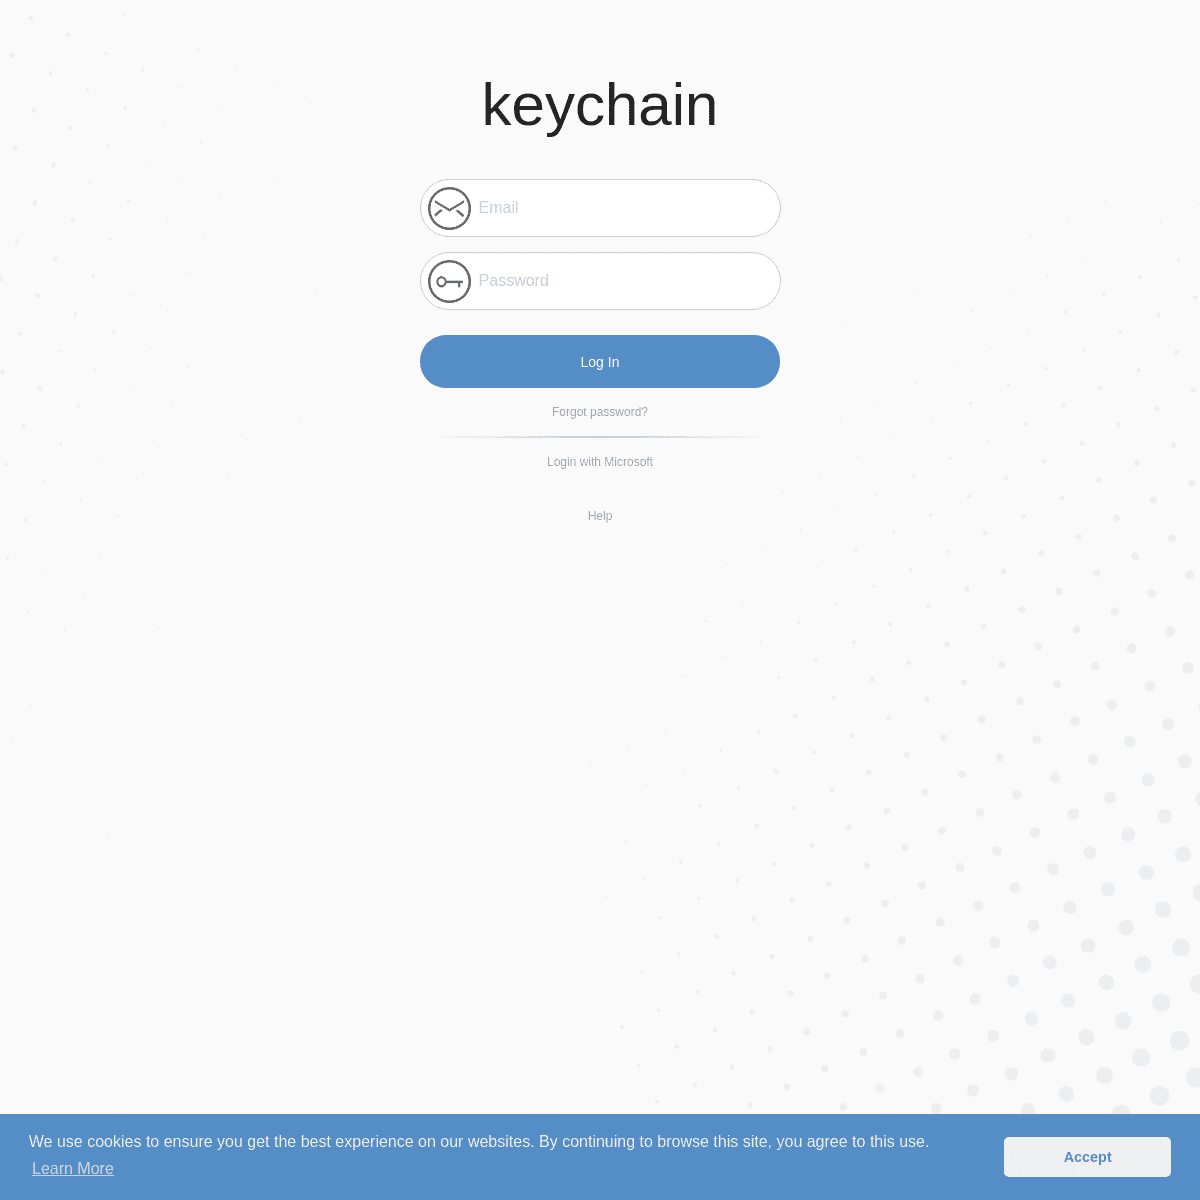 A complete backup of keychainserver.net